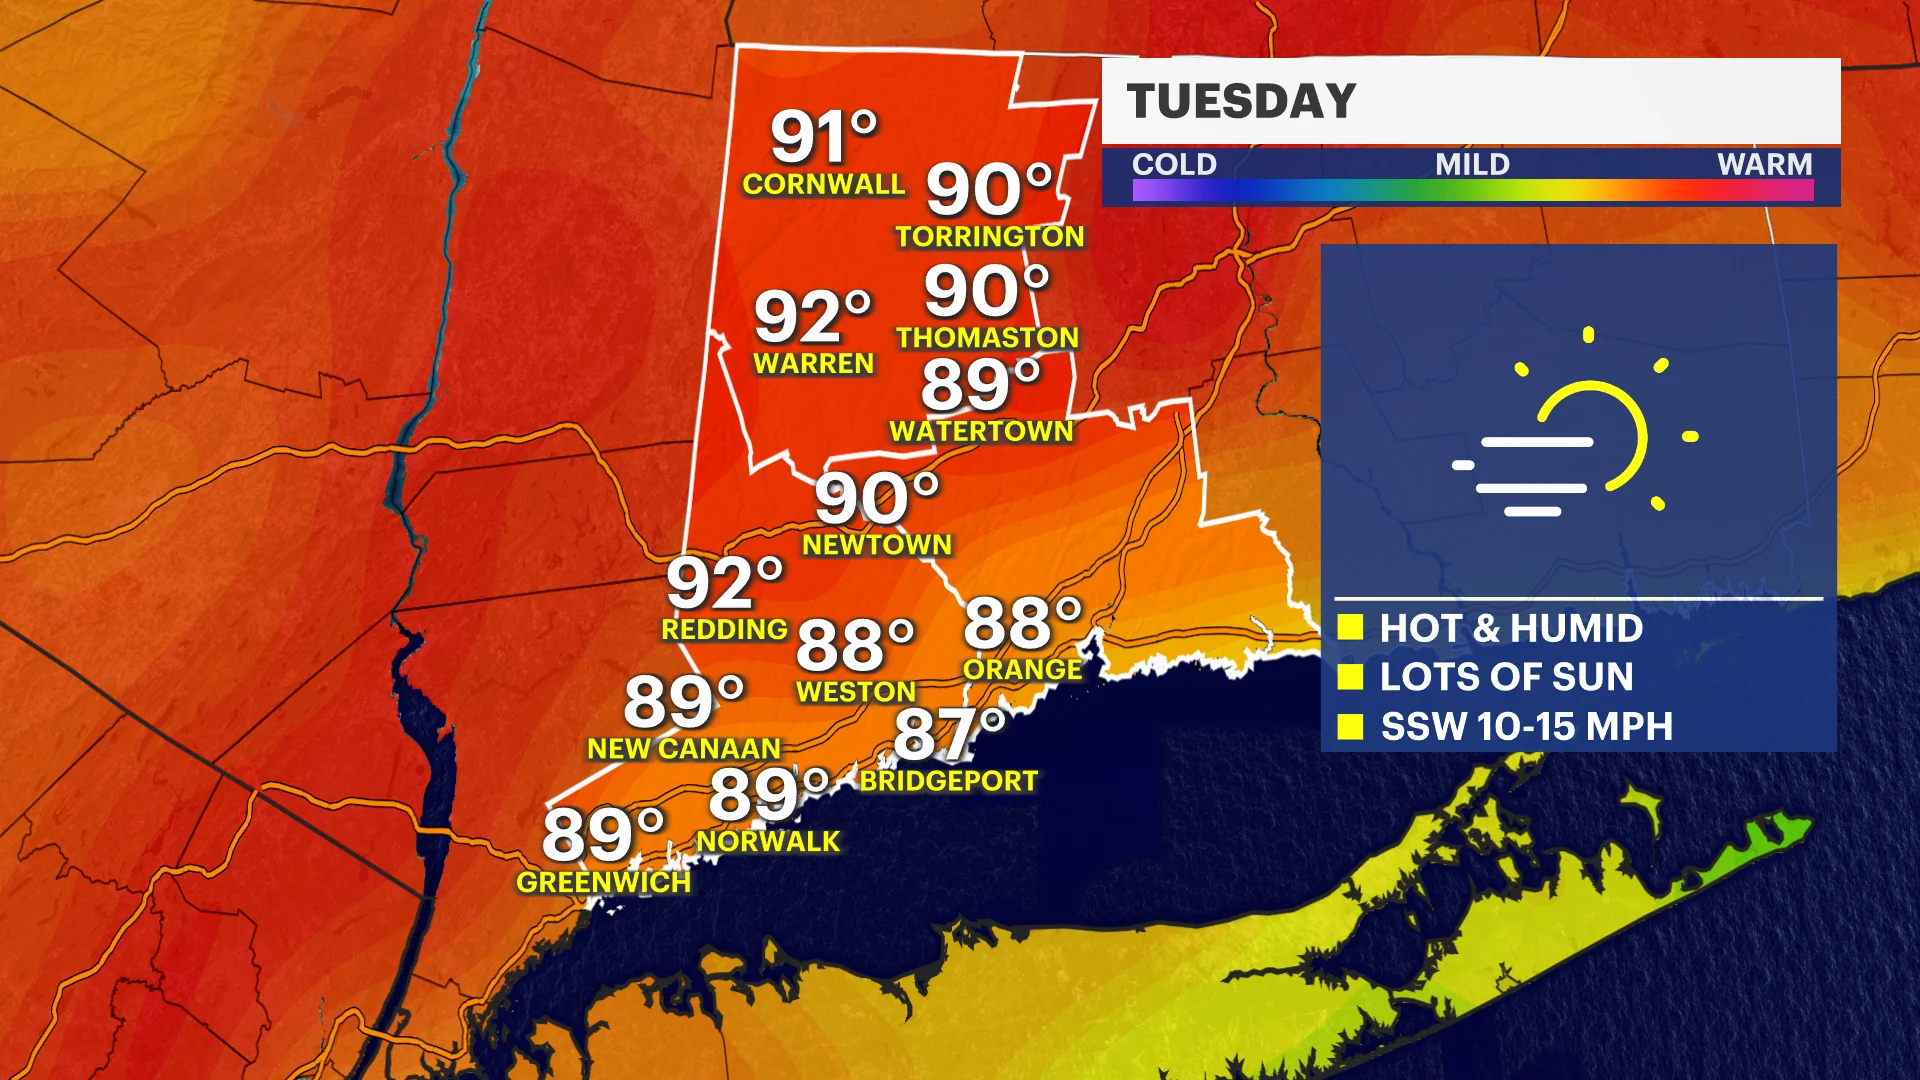 HEAT ALERT: Extreme heat settles in Connecticut with feel-like temperatures in the 90s. Heat advisory in effect